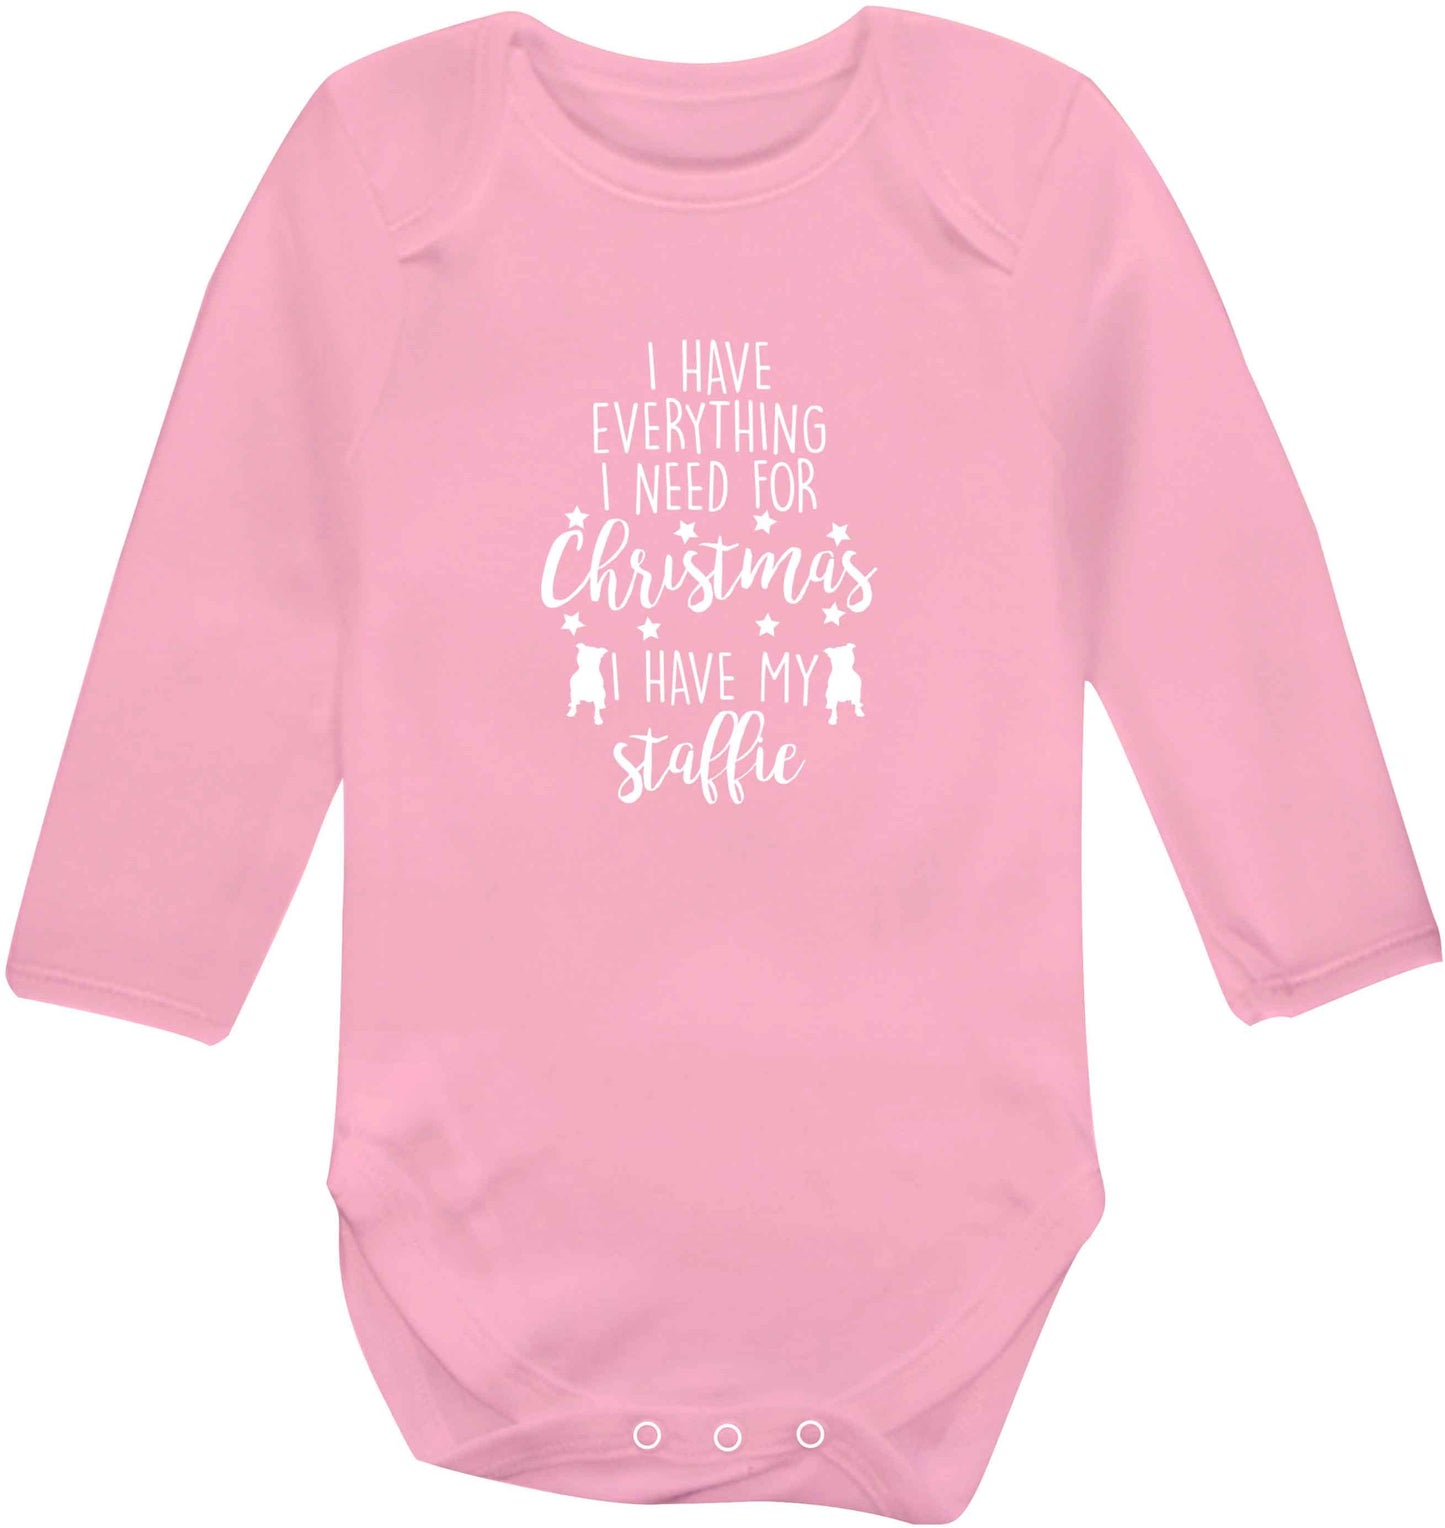 I have everything I need for Christmas I have my staffie baby vest long sleeved pale pink 6-12 months